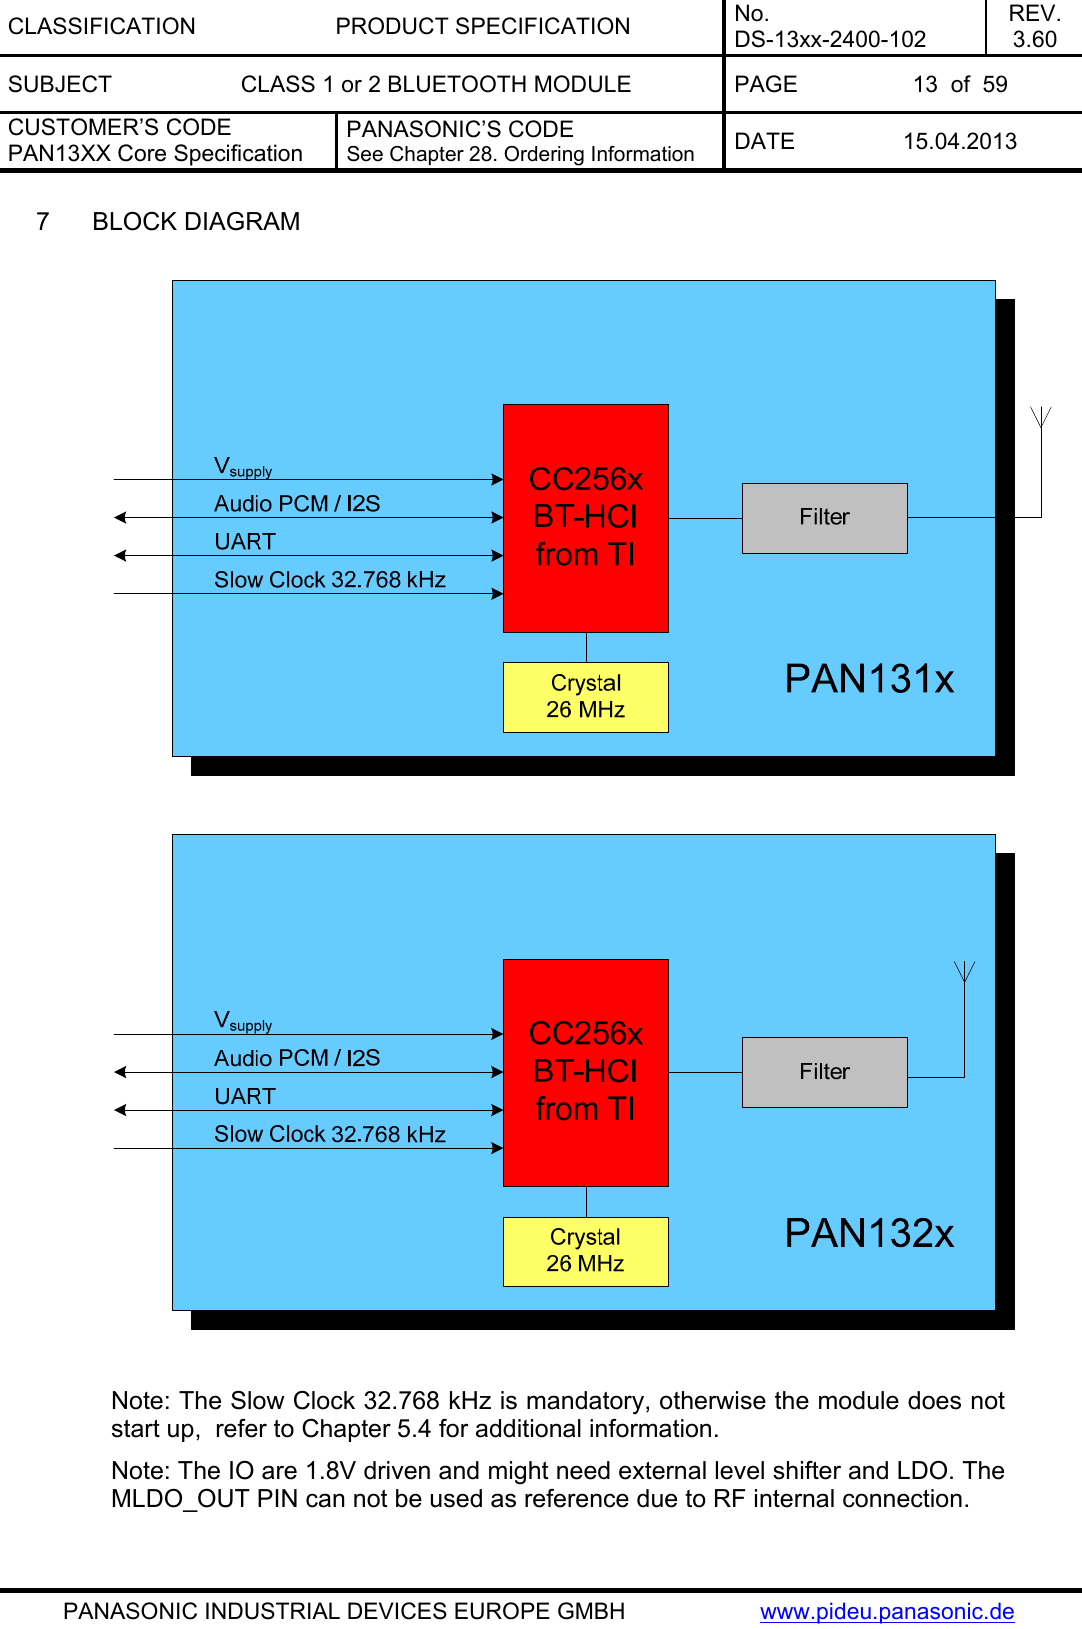 CLASSIFICATION PRODUCT SPECIFICATION No. DS-13xx-2400-102 REV. 3.60 SUBJECT  CLASS 1 or 2 BLUETOOTH MODULE  PAGE  13  of  59 CUSTOMER’S CODE PAN13XX Core Specification PANASONIC’S CODE See Chapter 28. Ordering Information  DATE 15.04.2013   PANASONIC INDUSTRIAL DEVICES EUROPE GMBH  www.pideu.panasonic.de 7  BLOCK DIAGRAM      Note: The Slow Clock 32.768 kHz is mandatory, otherwise the module does not start up,  refer to Chapter 5.4 for additional information.  Note: The IO are 1.8V driven and might need external level shifter and LDO. The MLDO_OUT PIN can not be used as reference due to RF internal connection.    